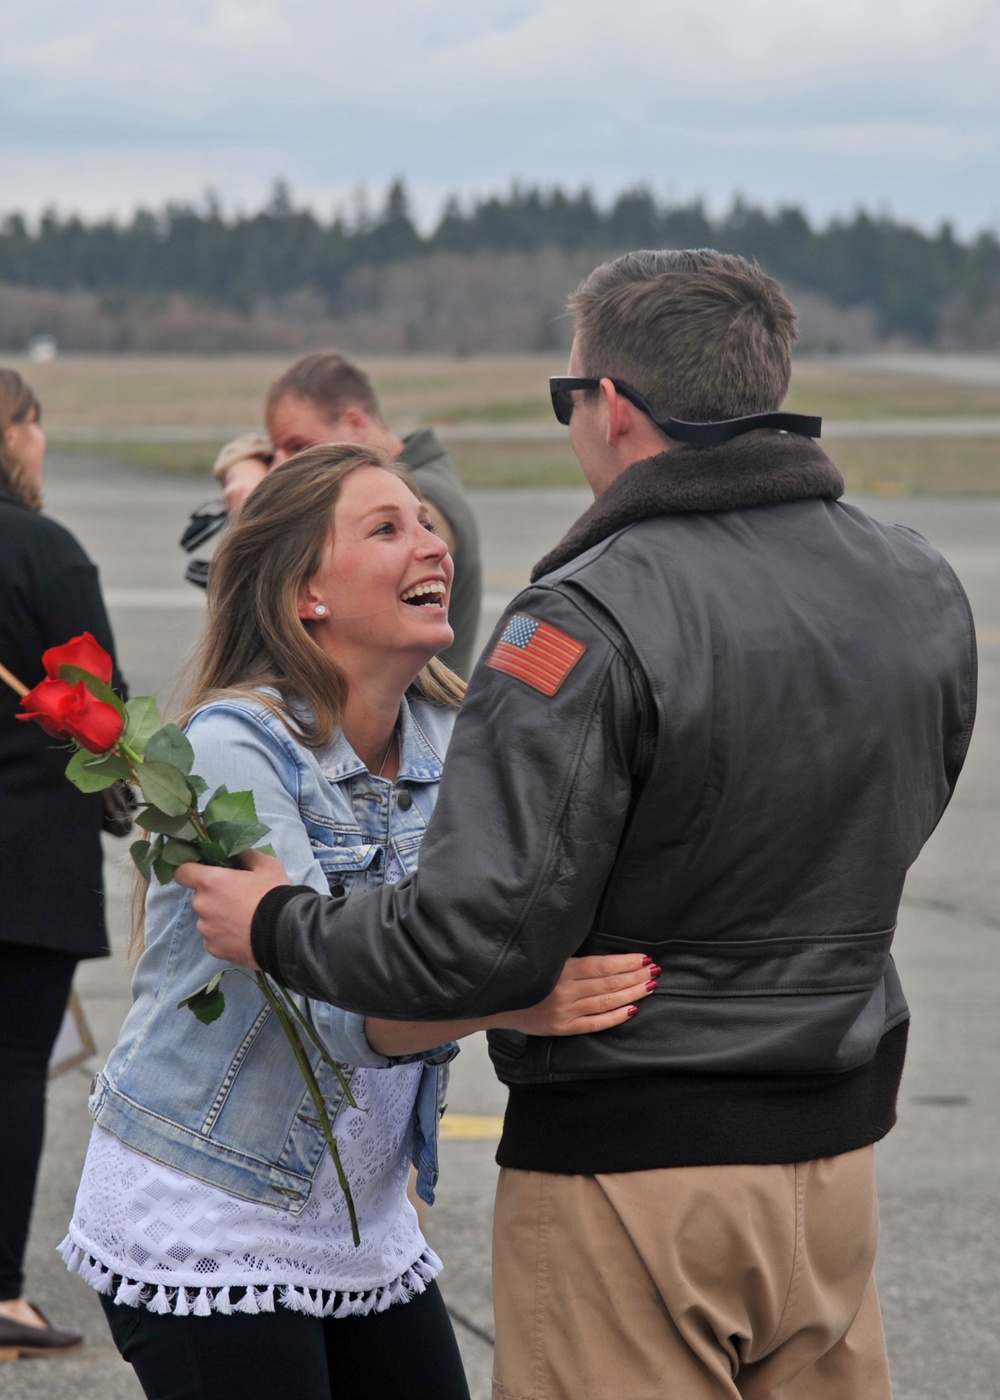 VP-40 Sailors Welcomed Home by Friends and Family